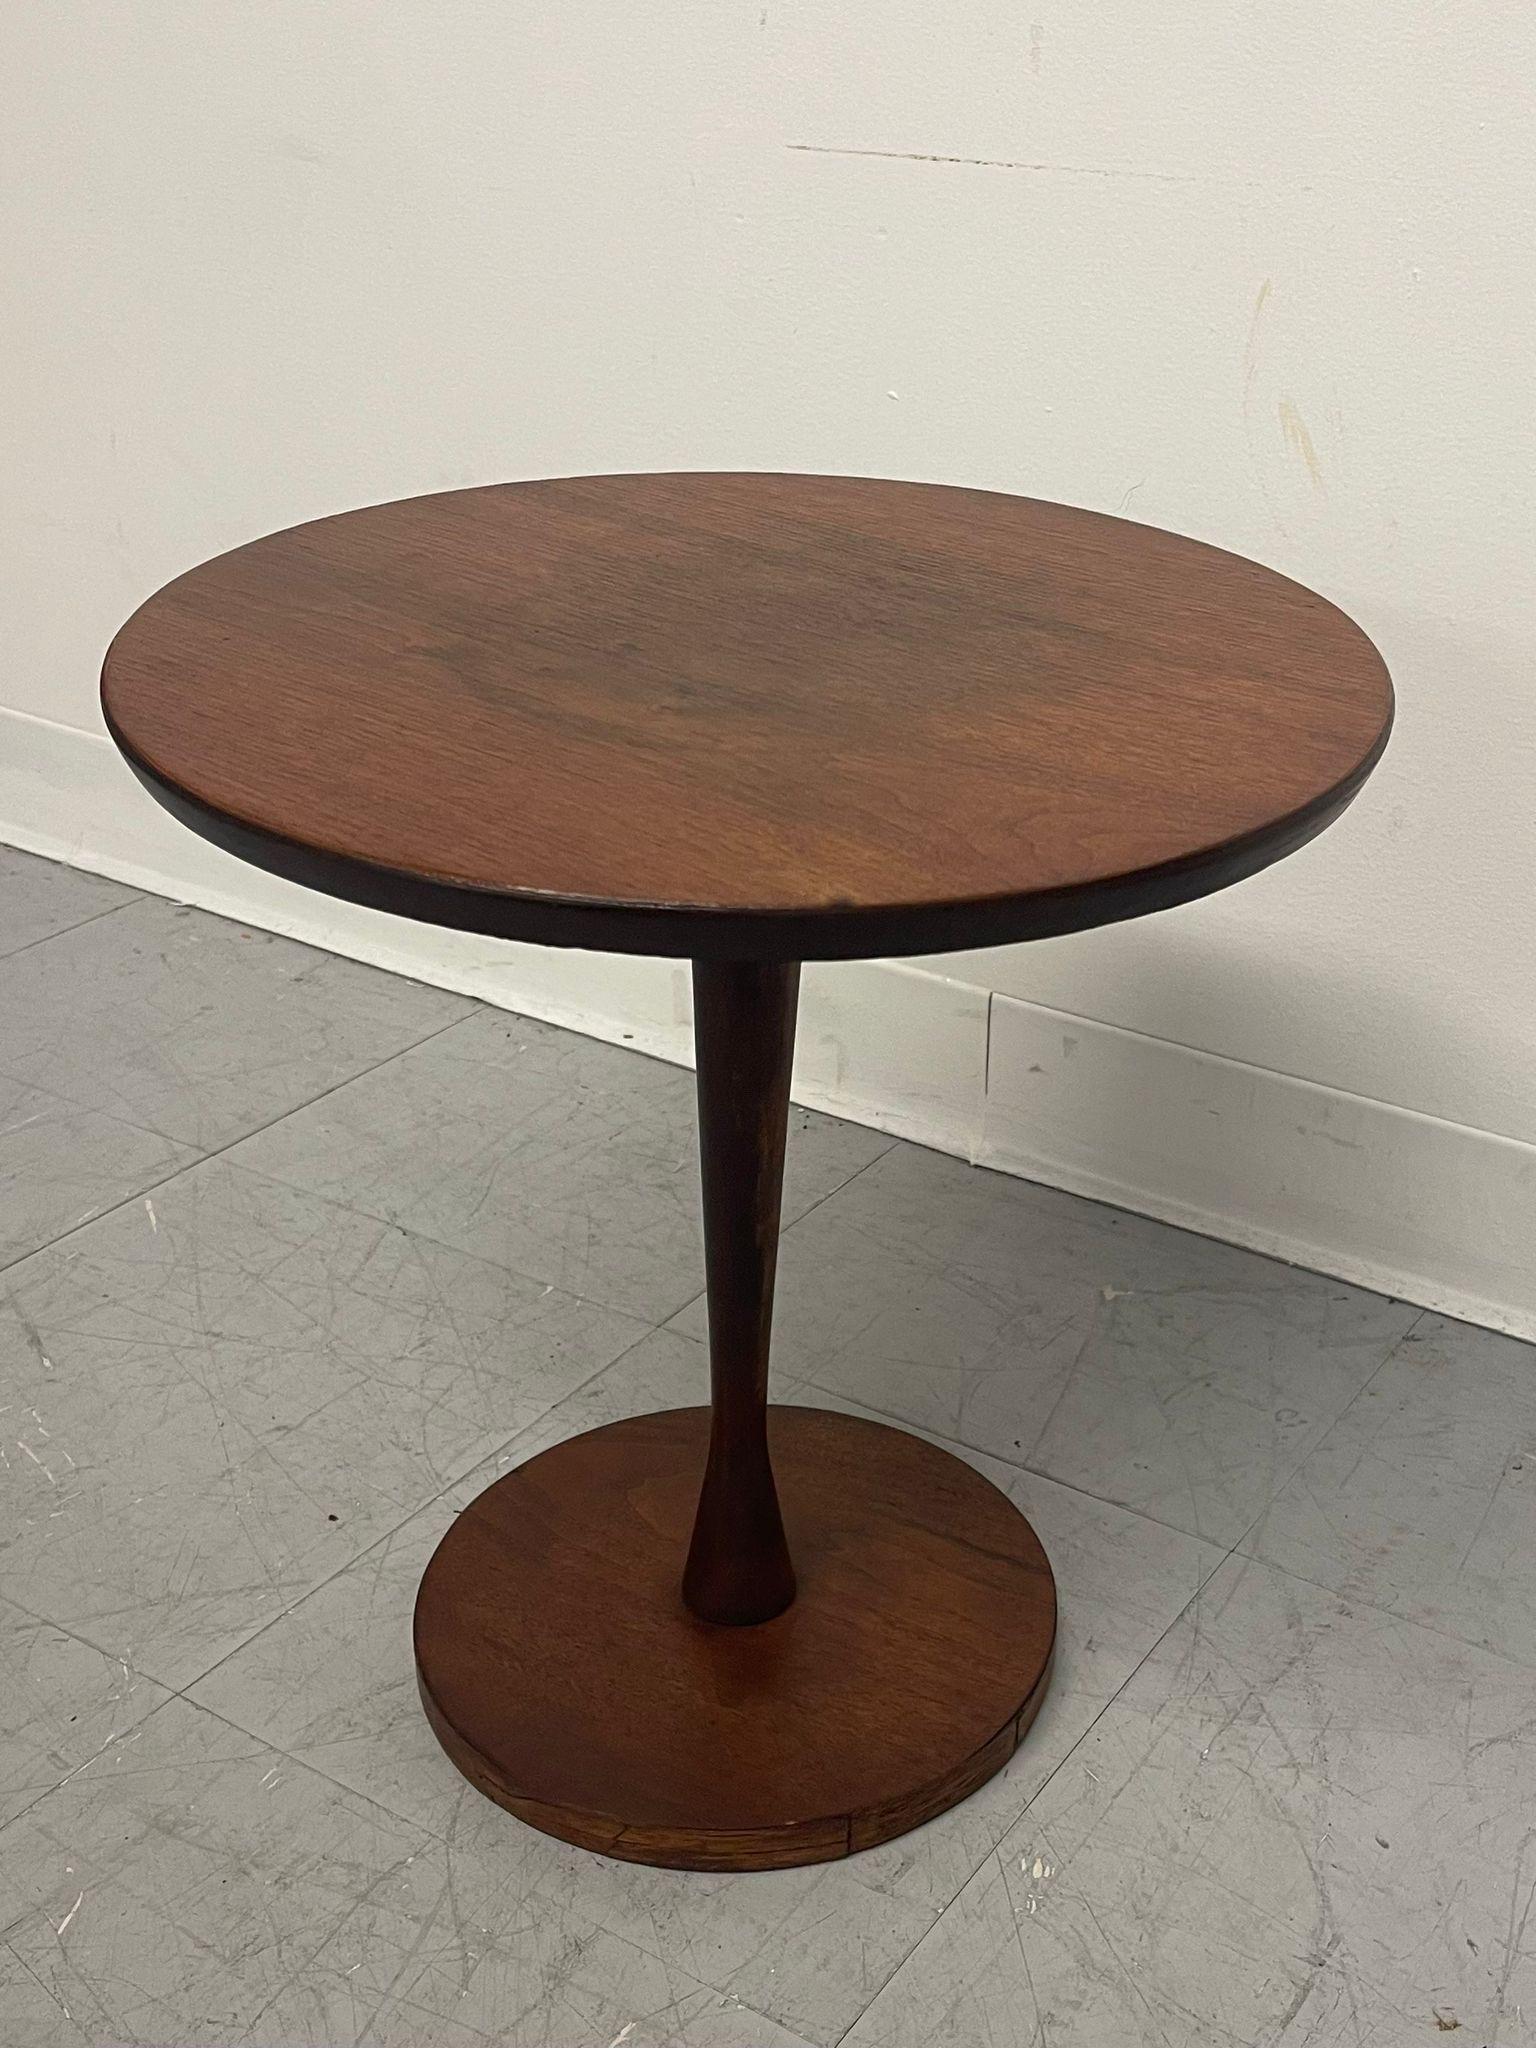 Circular Side Table with Atomic Curvature to the Column Trunk. Circular Base. Vintage Condition Consistent with Age as Pictured.

Dimensions. 15 1/2 Diameter ; 16 H